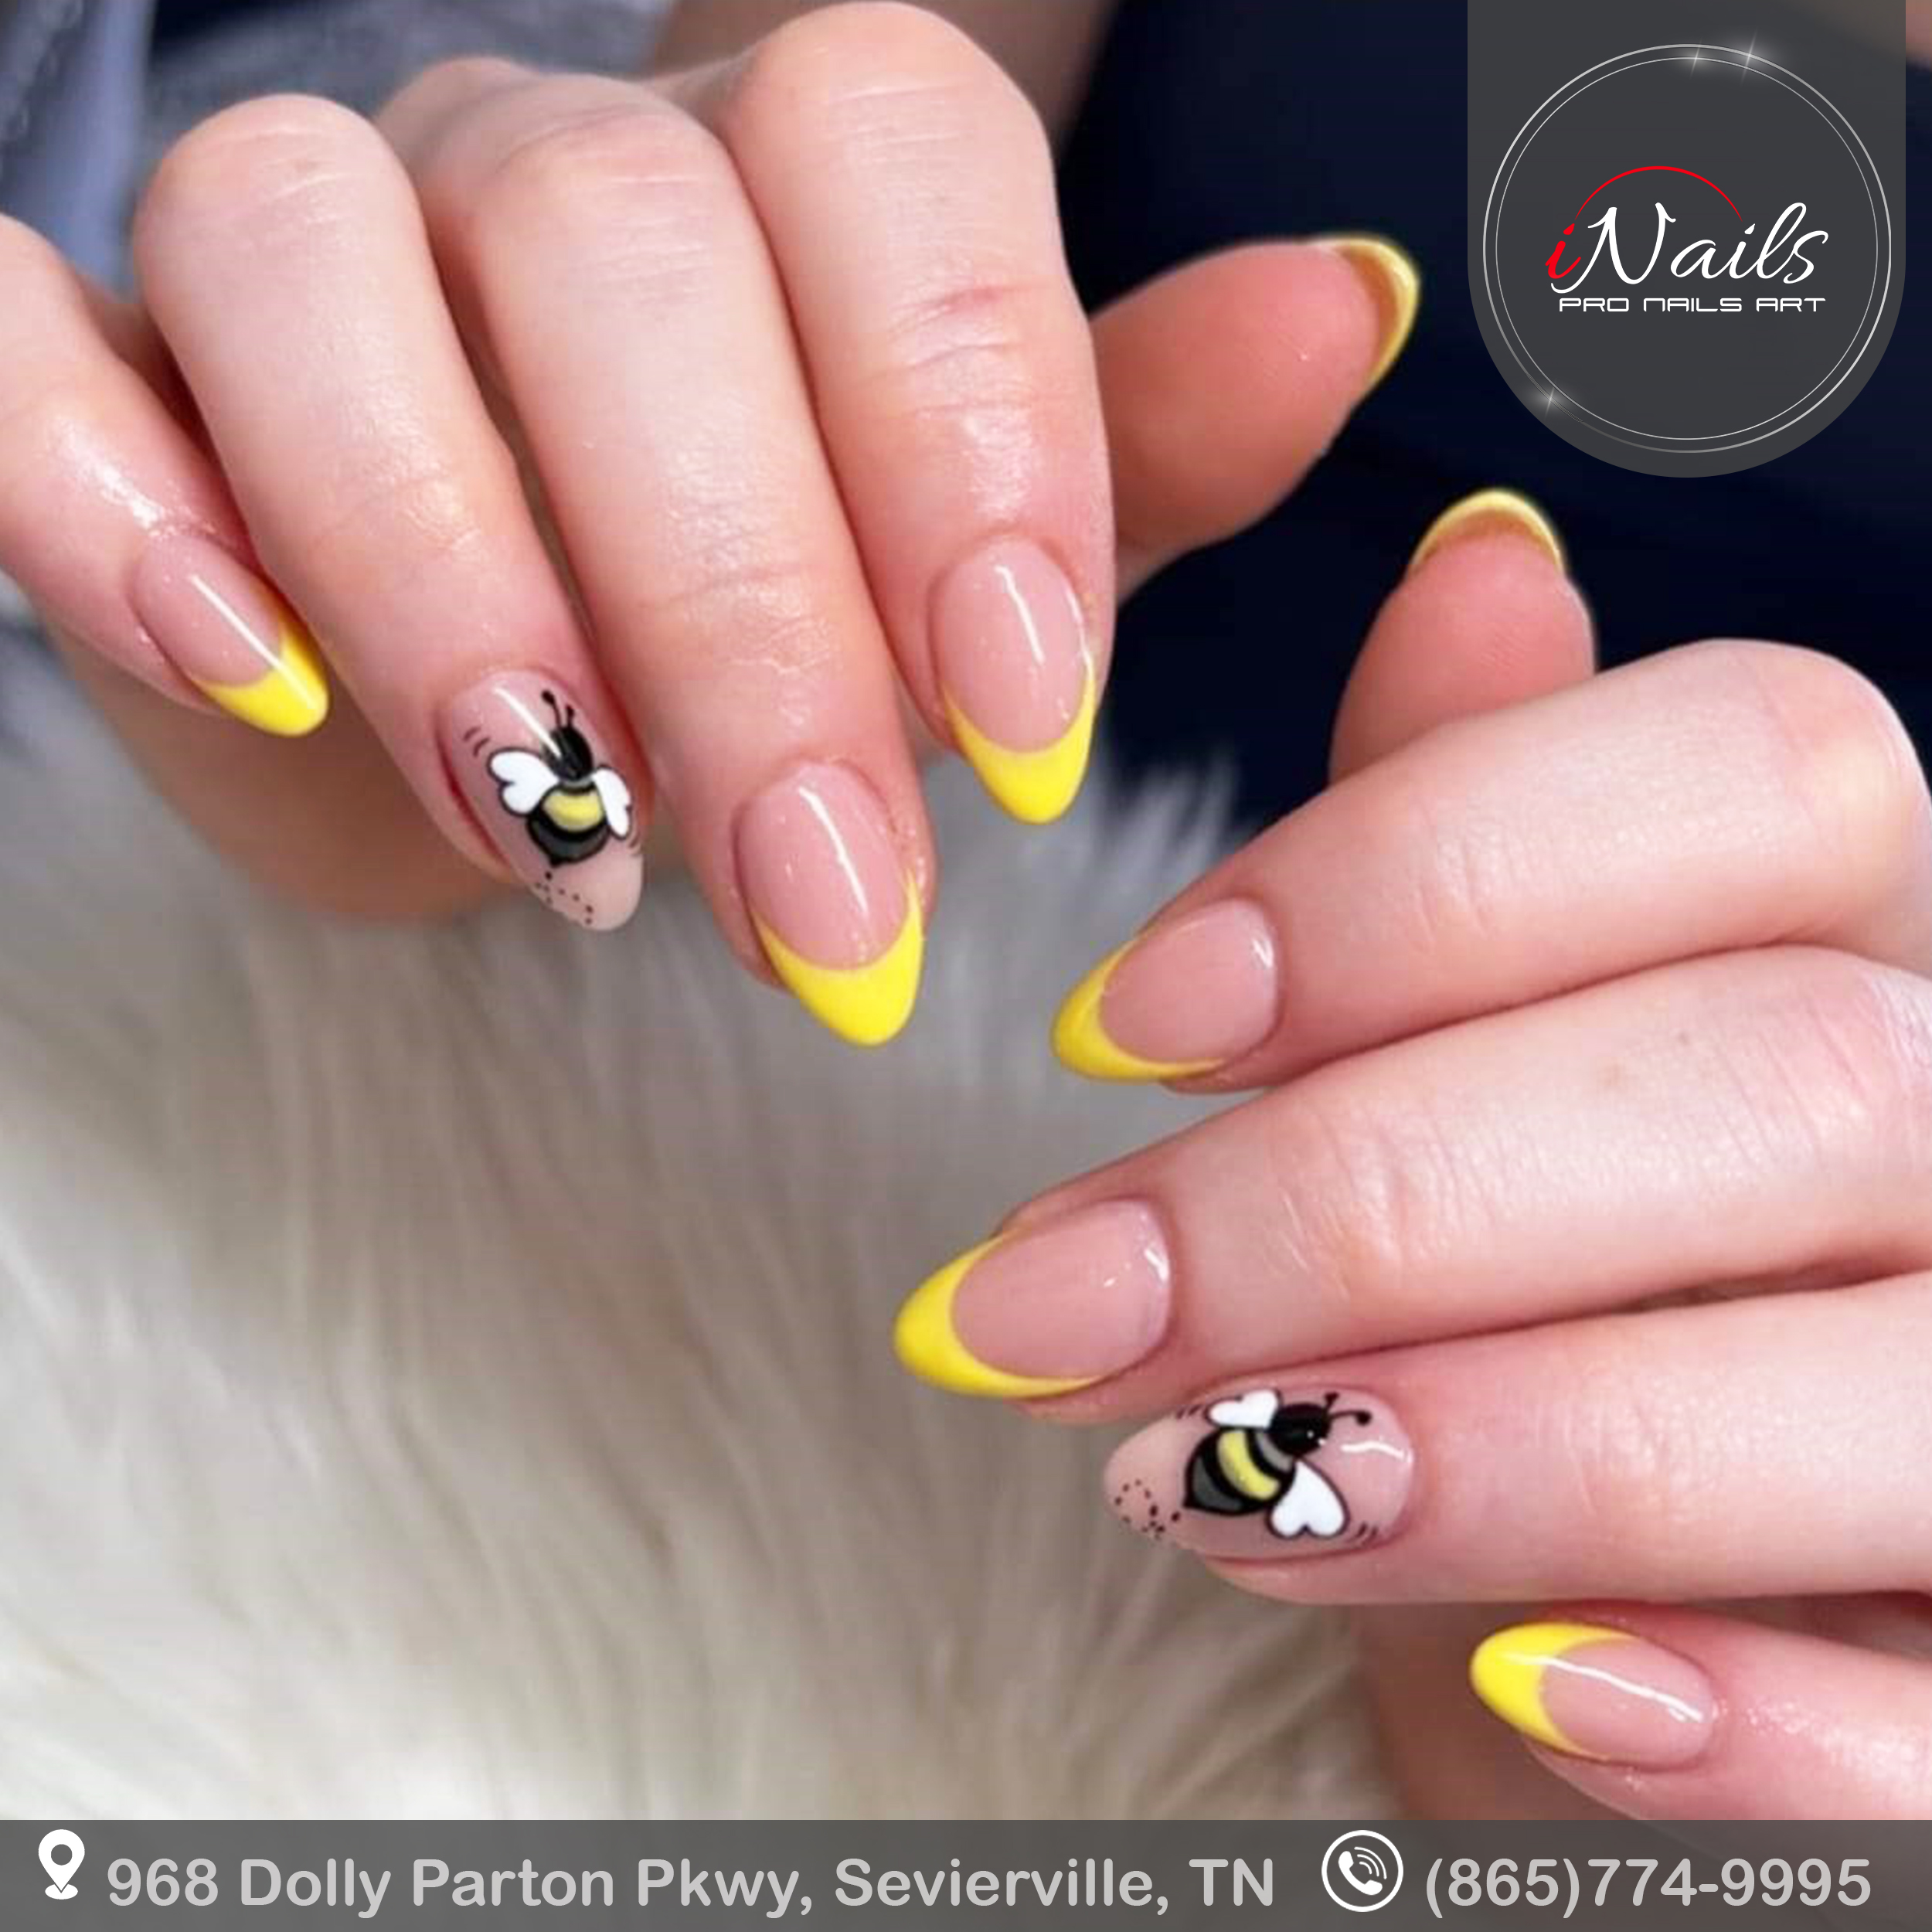 Spring nails inails Sevierville jhlfs